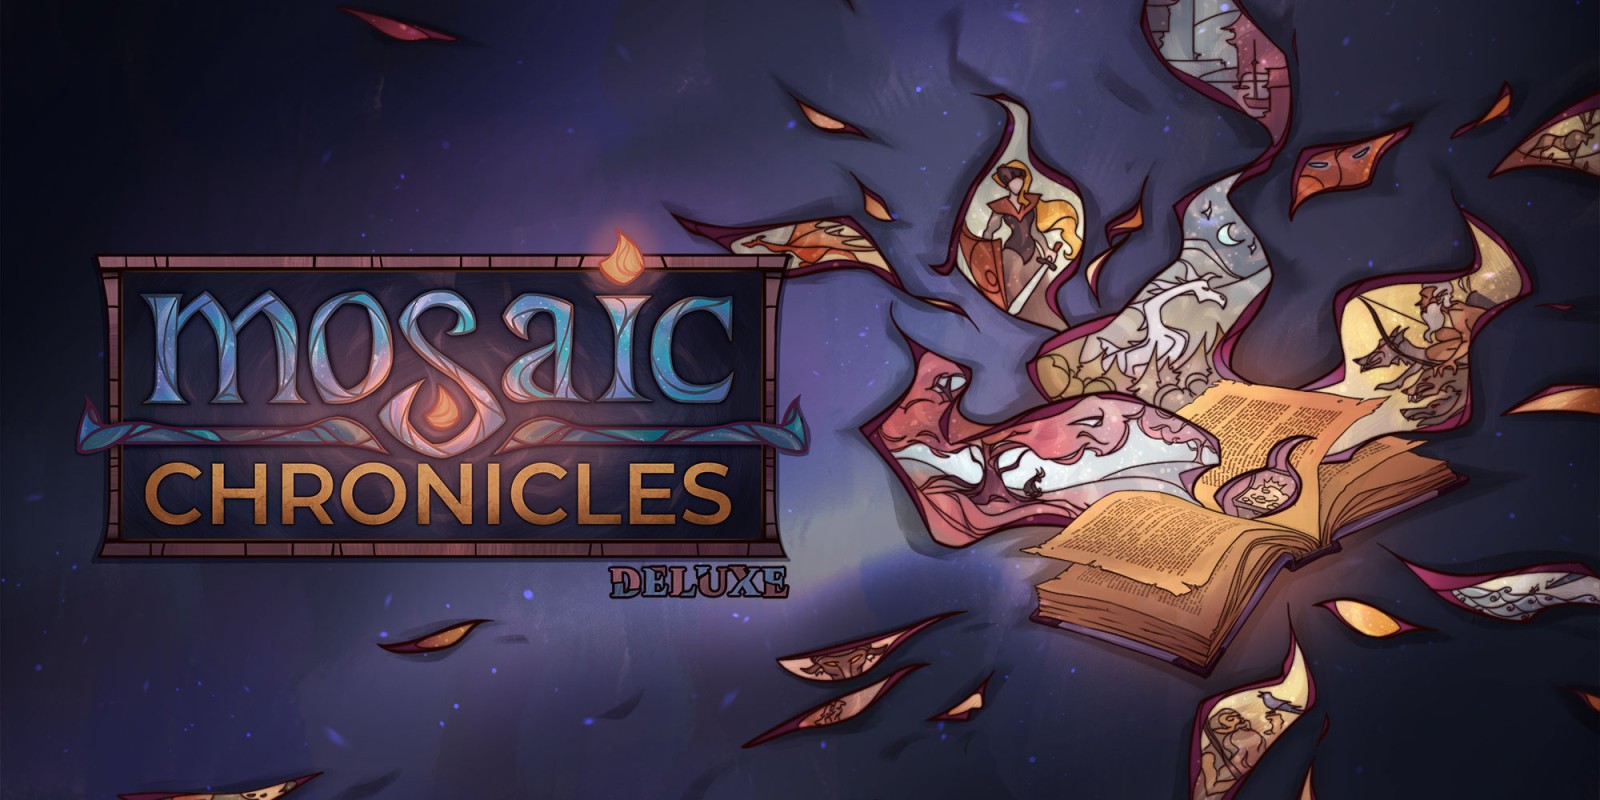 Mosaic Chronicles Deluxe